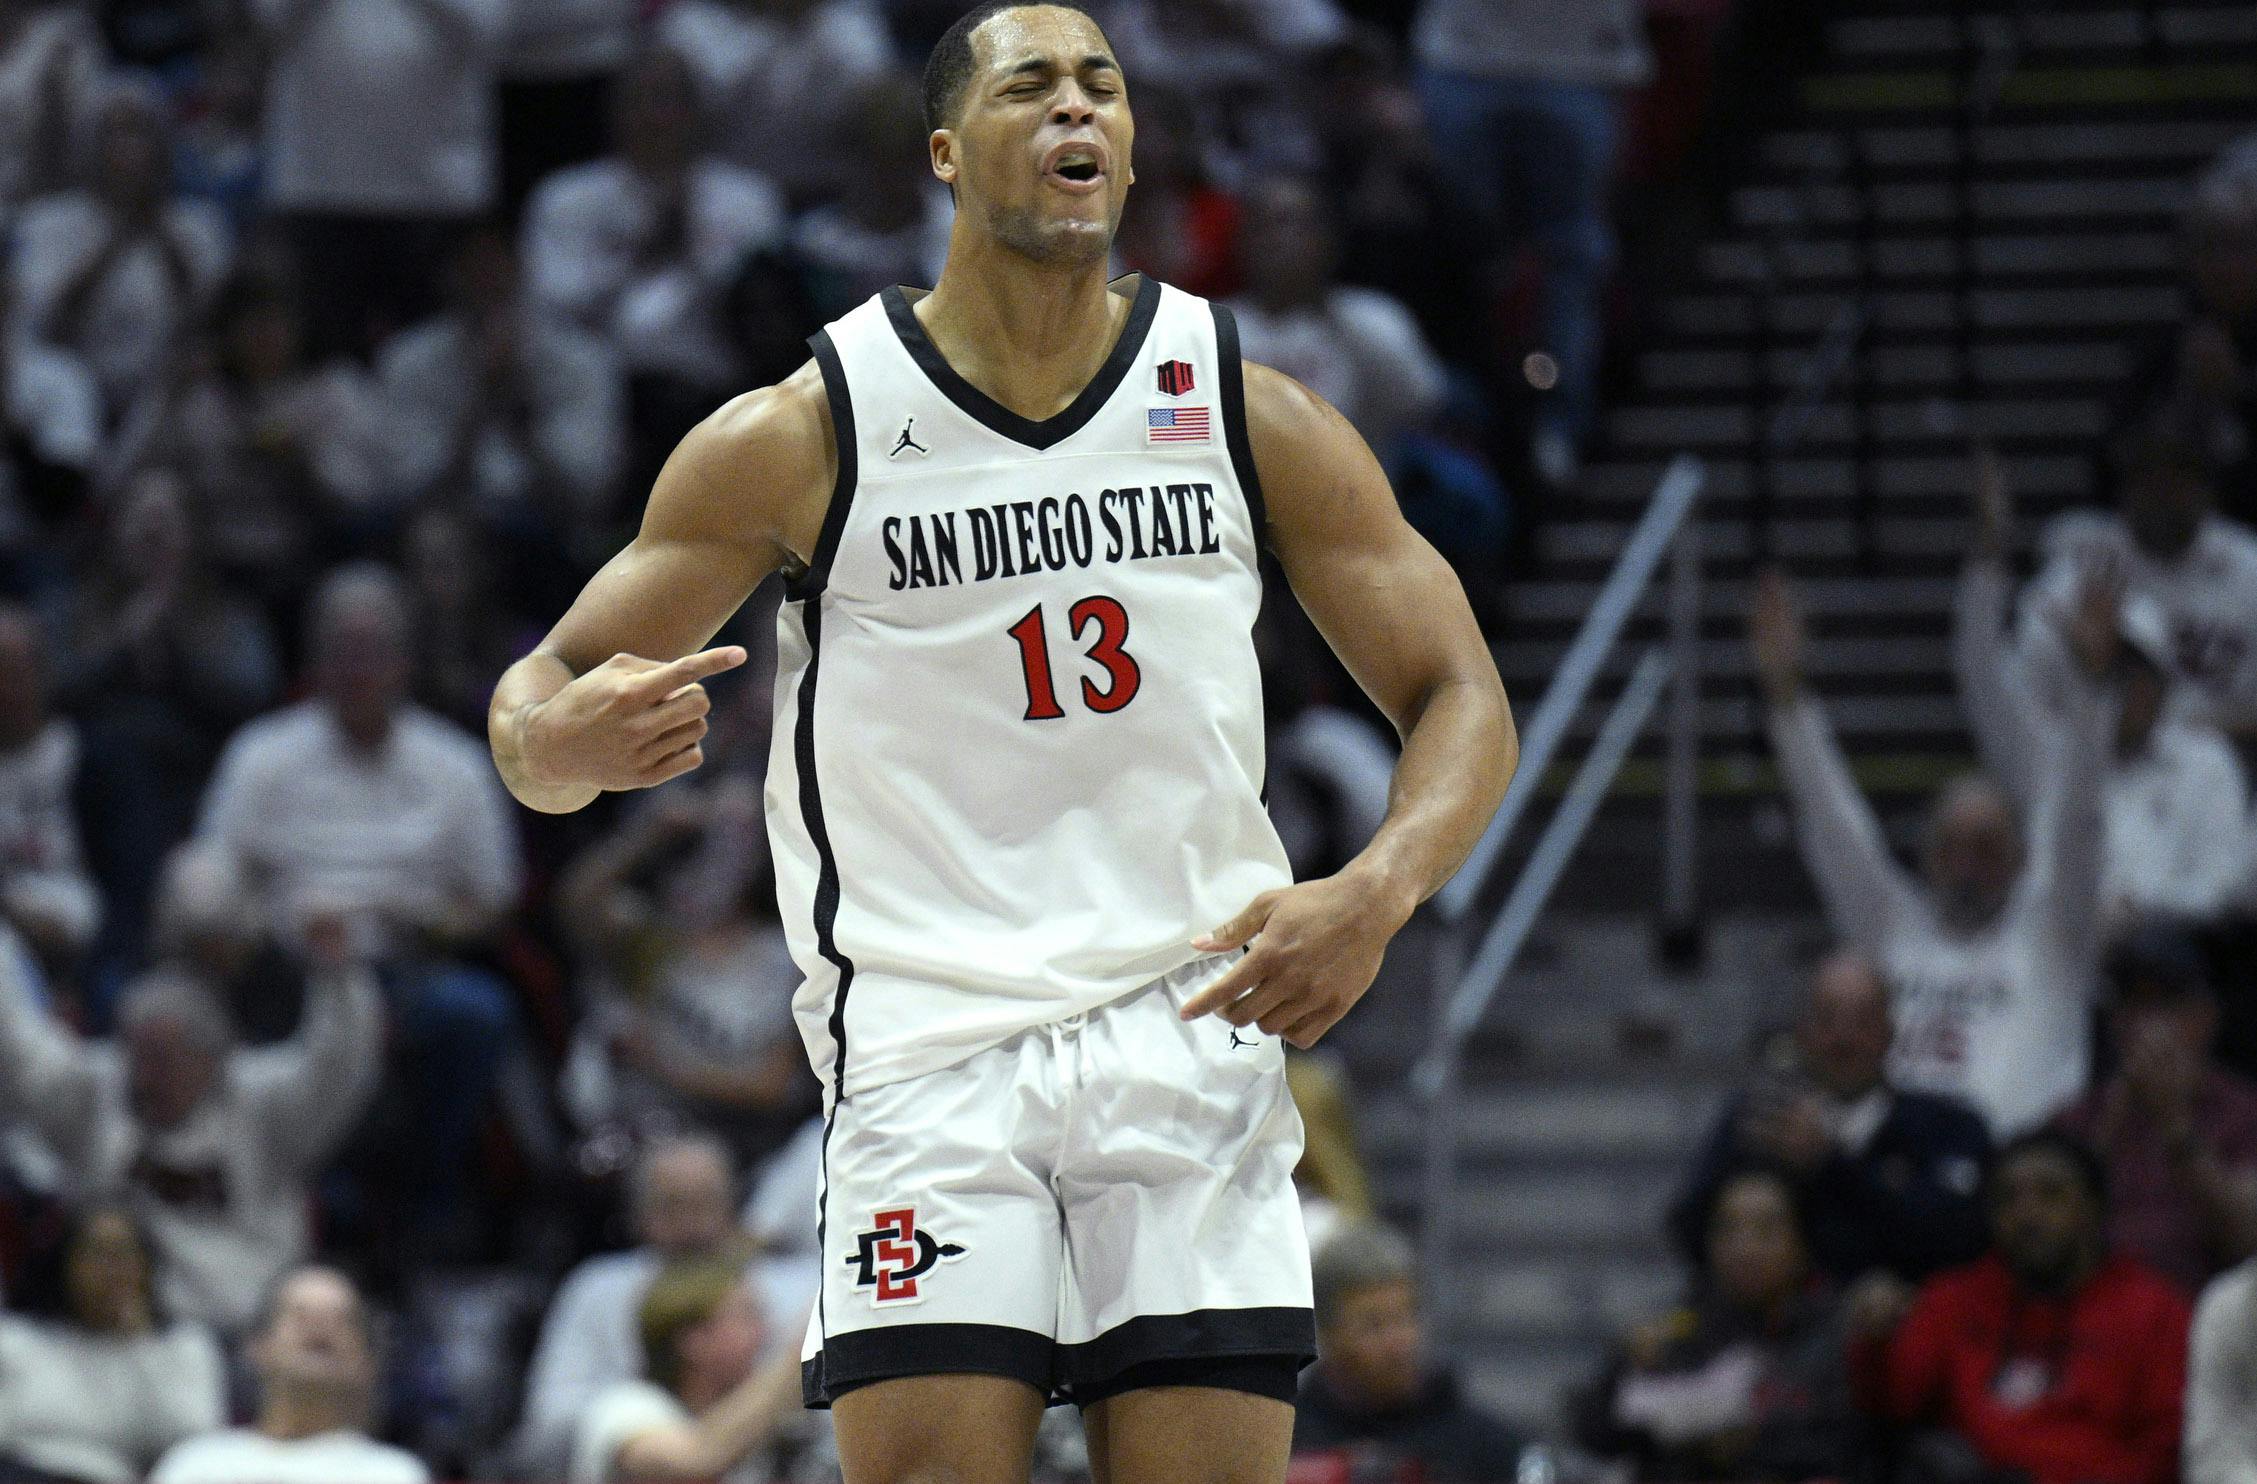 San Diego State Aztecs forward Jaedon LeDee (13) celebrates after a basket during the first half against the Boise State Broncos at Viejas Arena.